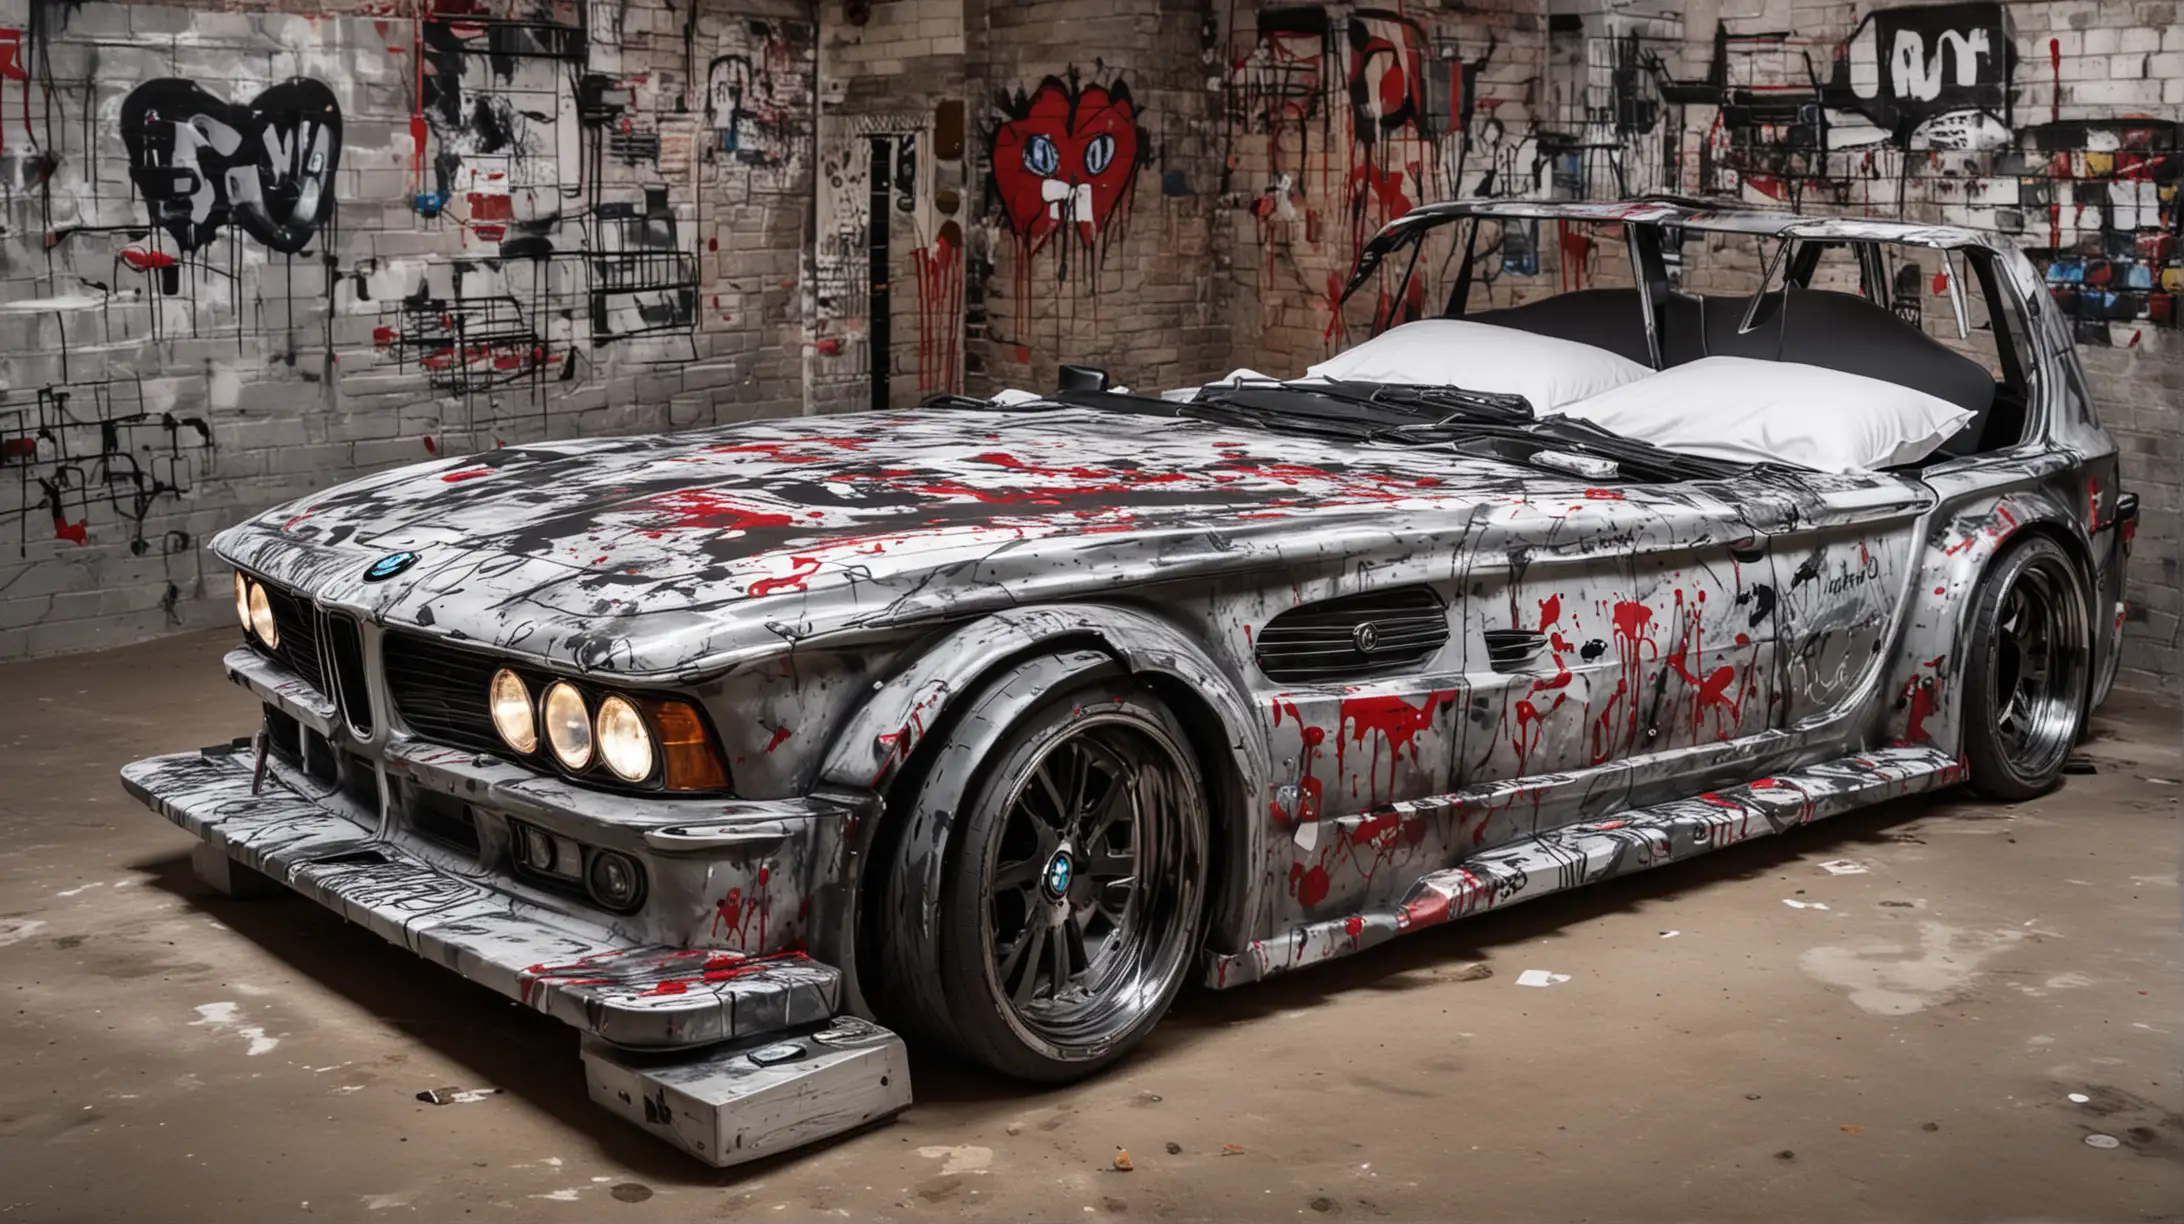 BMW CarShaped Double Bed with Headlights On and Graffiti Blood